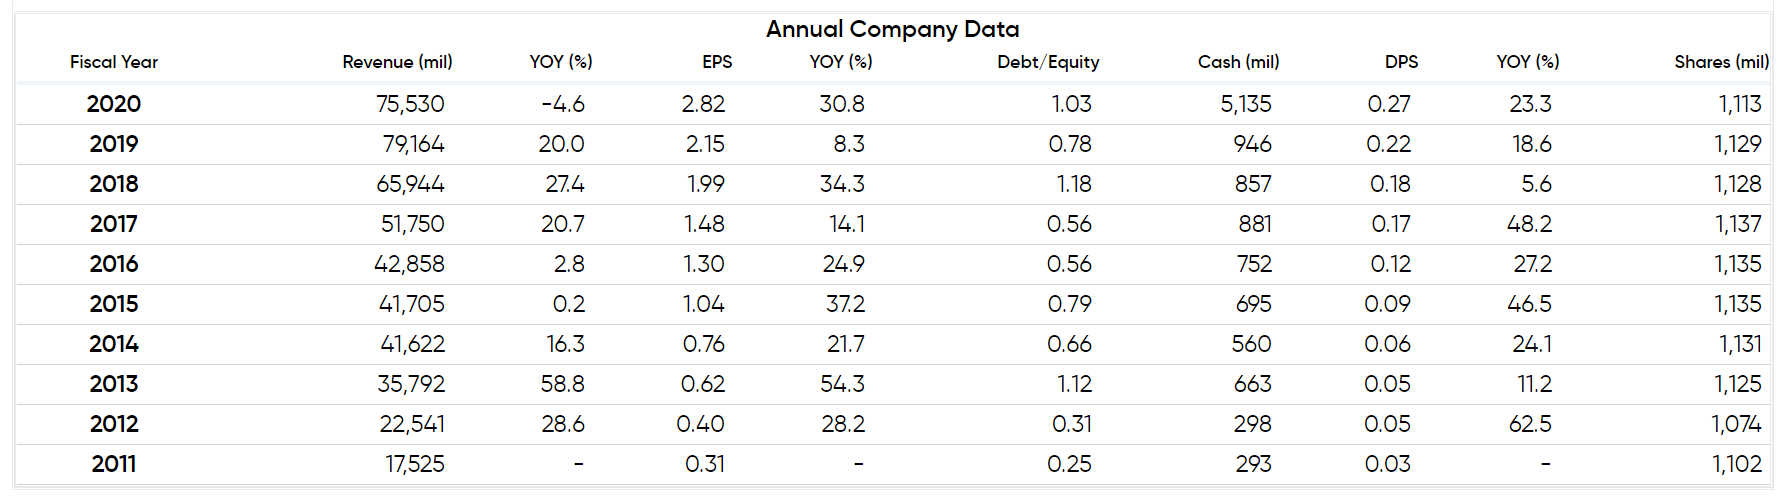 Example of annual company data